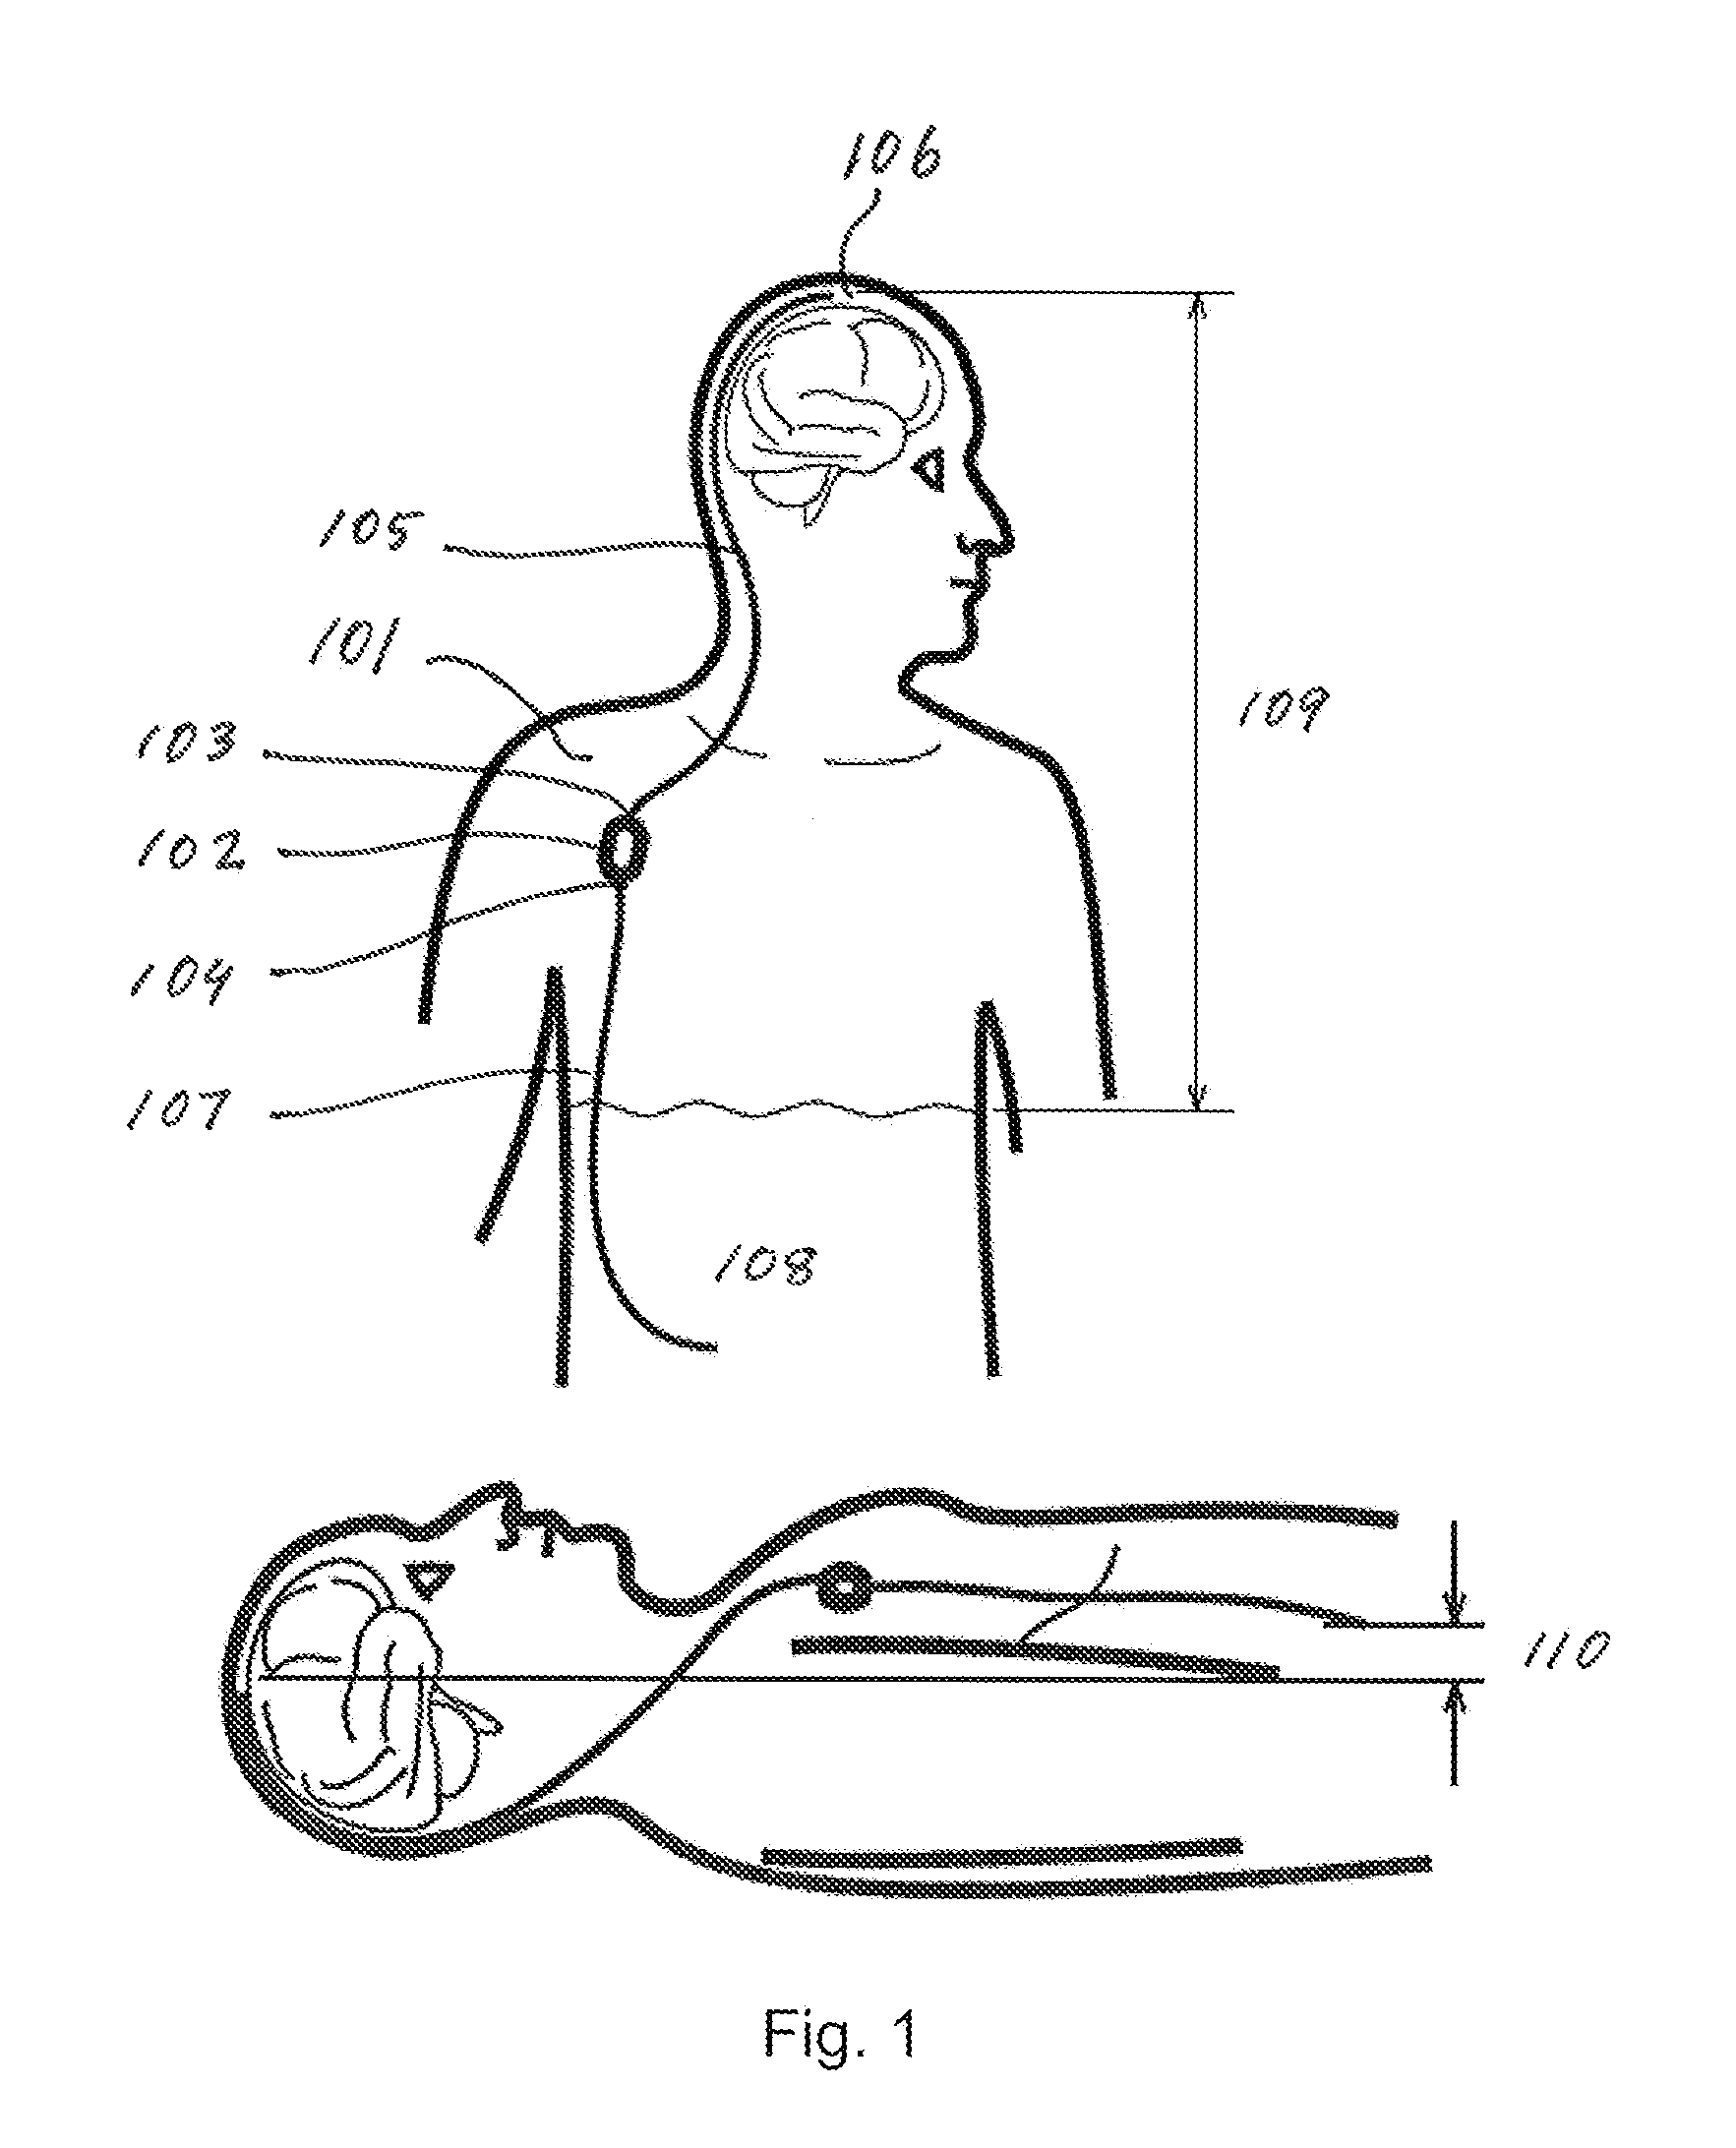 Cerebrospinal fluid shunt for treatment of hydrocephalus